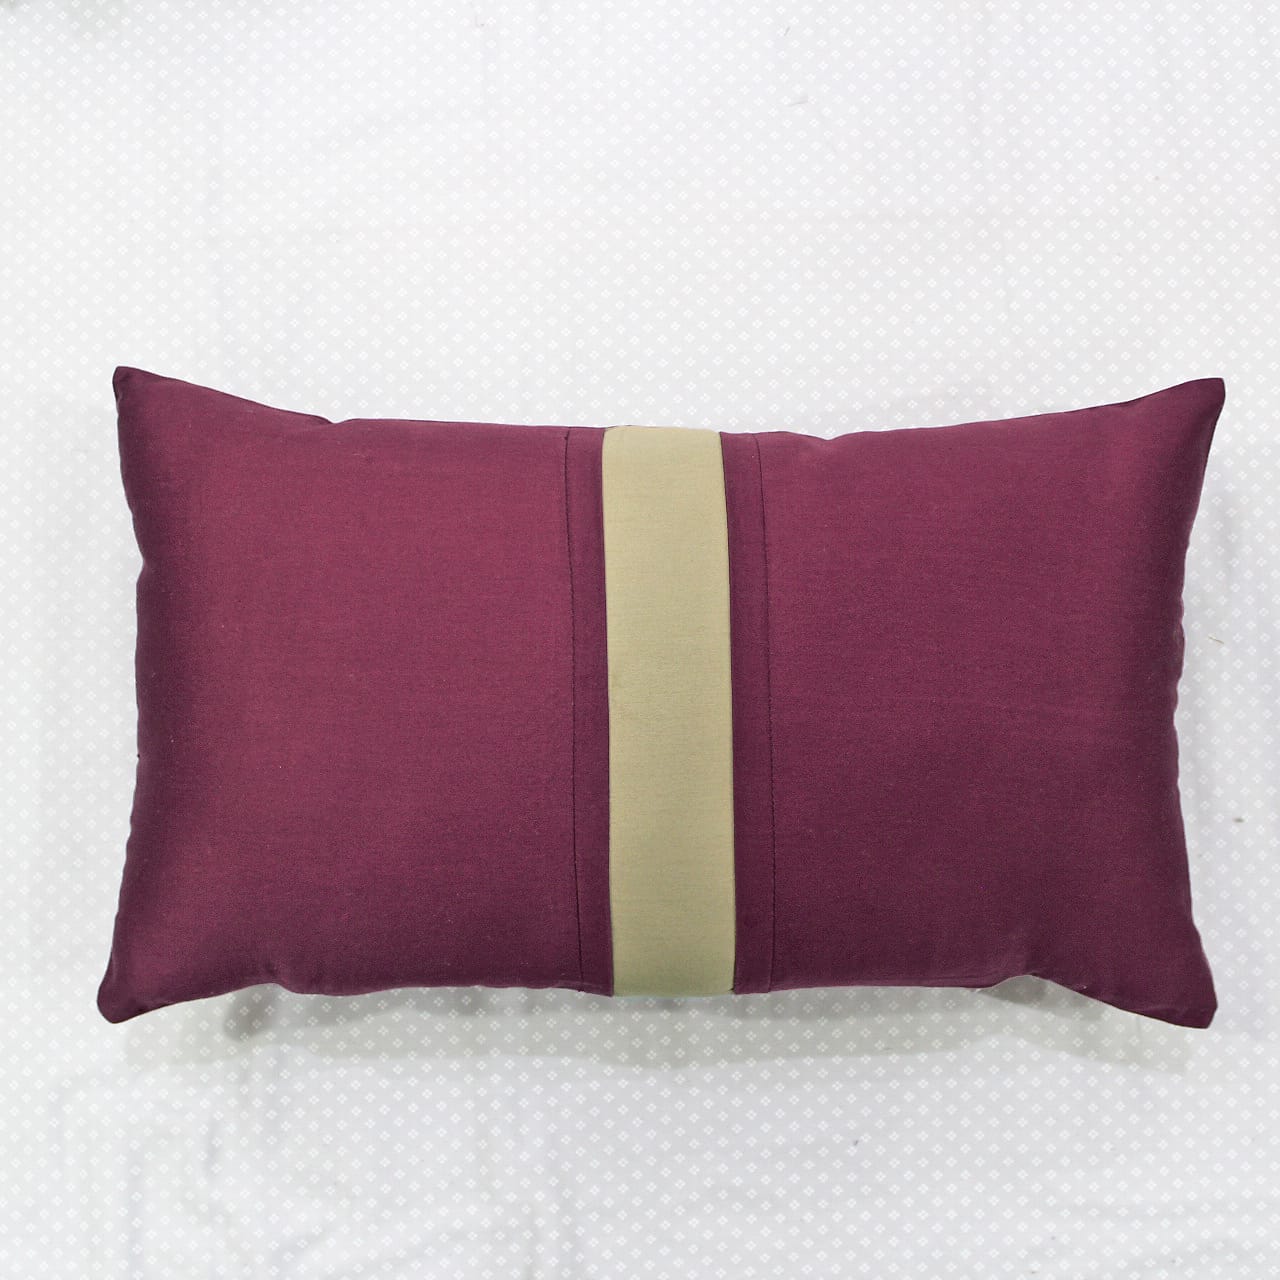 Cotton Satin Patch Throw/Lumbar Pillow for Couch/Bed (with insert)